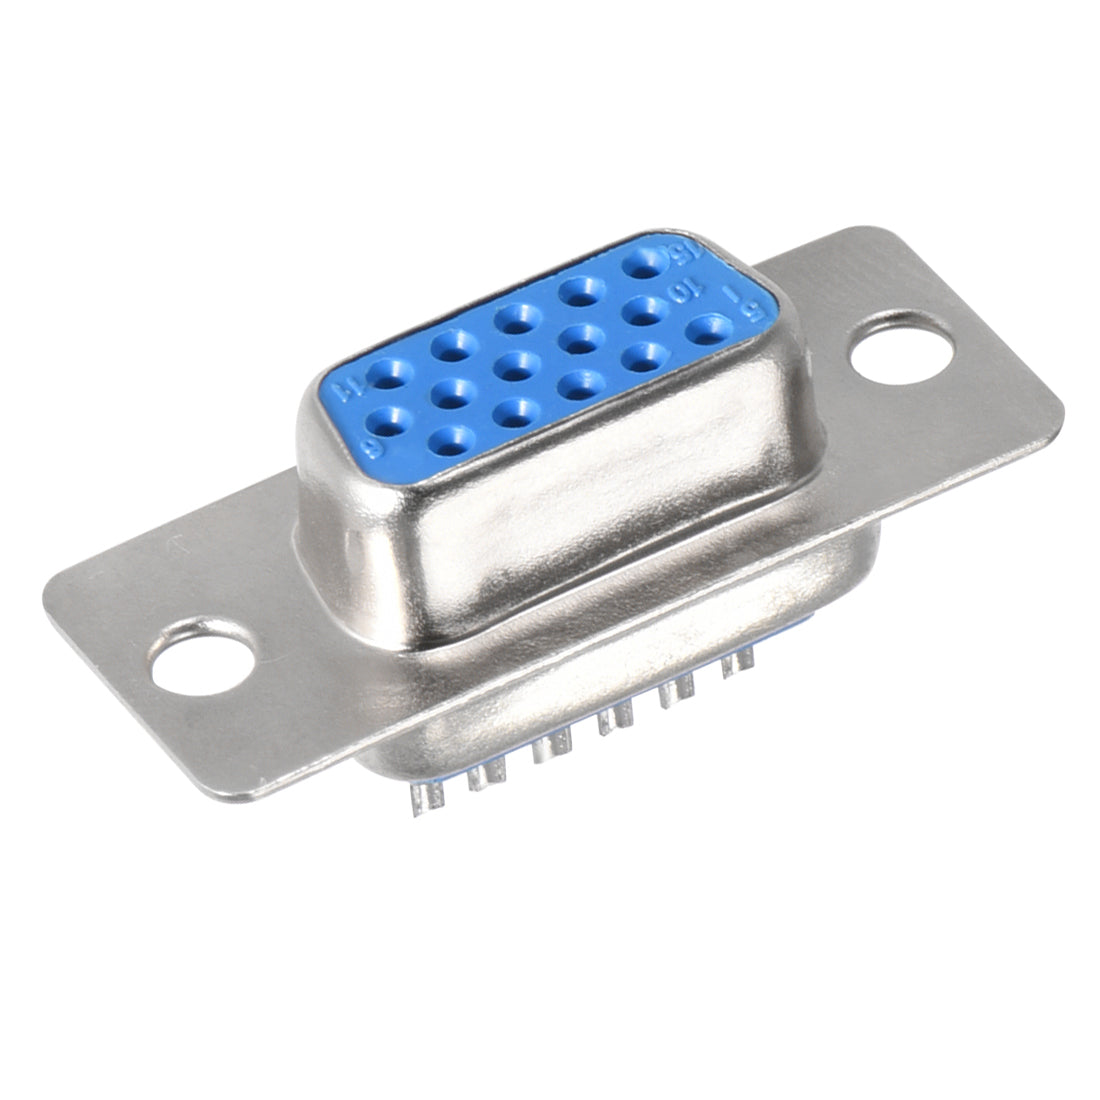 uxcell Uxcell D-sub Connector Female Socket 15-pin 3-row Port Terminal Breakout for Mechanical Equipment CNC Computers 10pcs